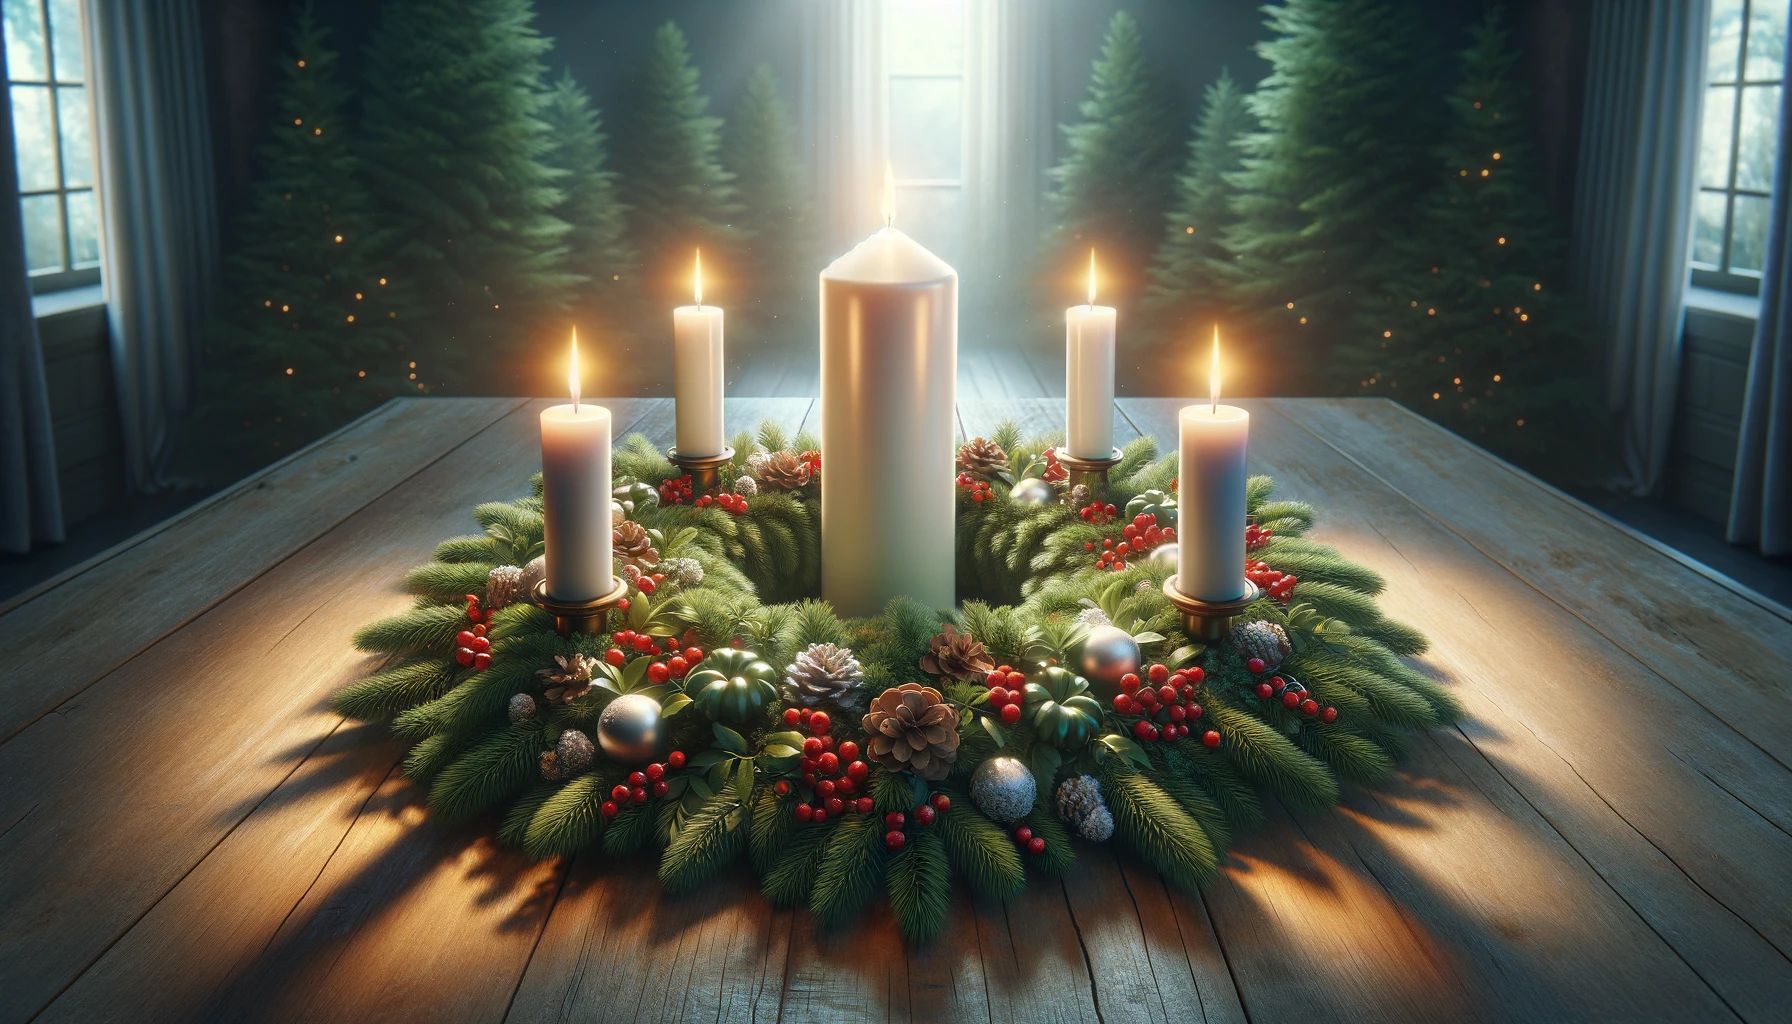 What Is The Order Of The Advent Candles?